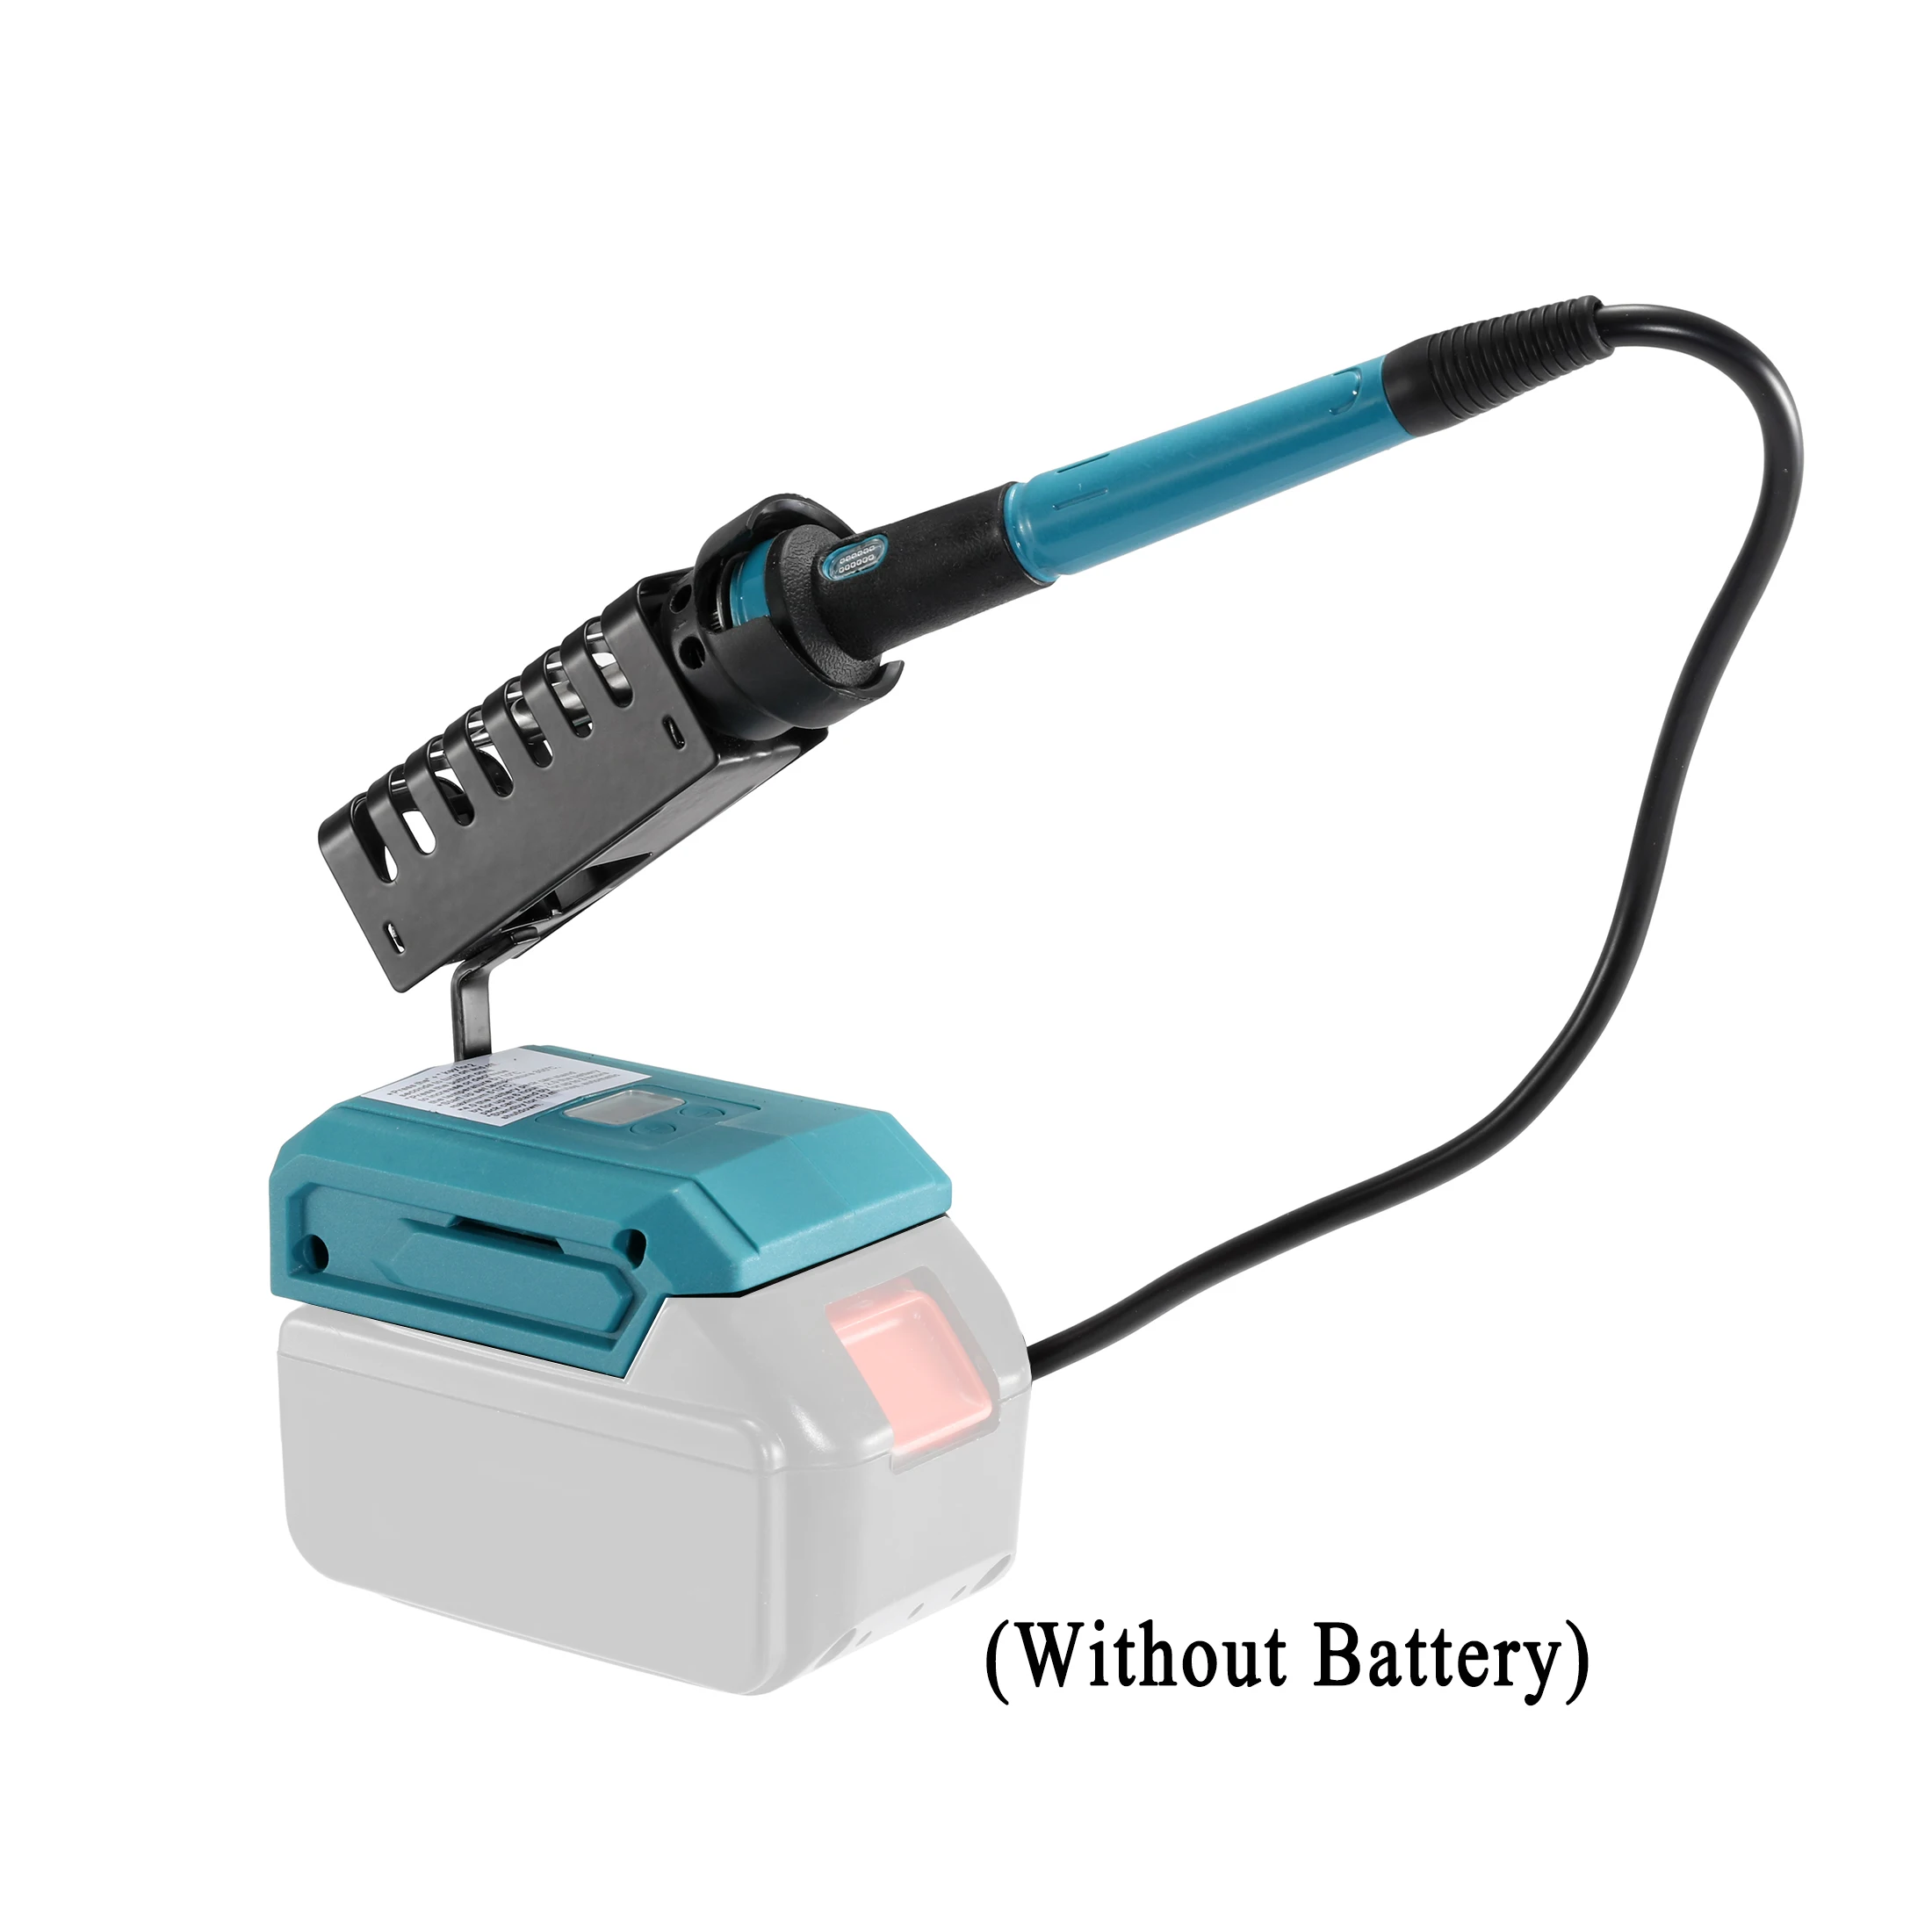 

Iron Makita For Tool Welding Battery Adjustable Heating Temperature Soldering Fast 300-500℃ Electric Power Wireless